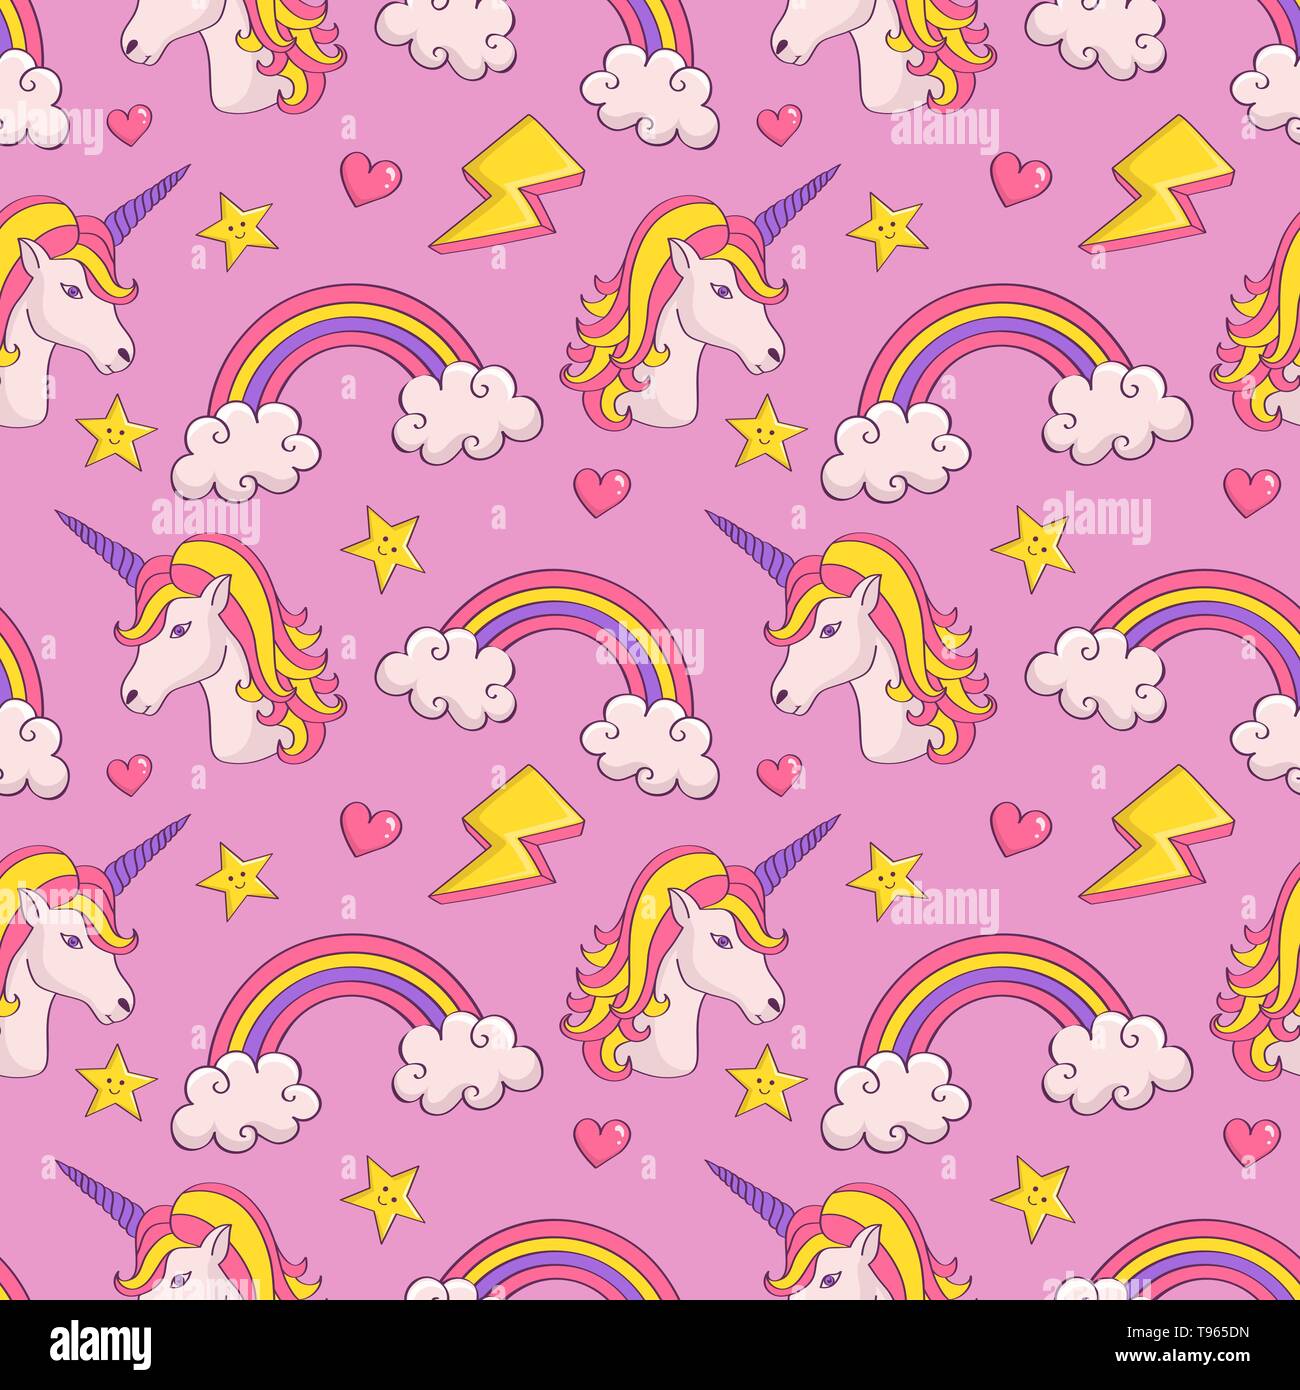 Dreamy pattern with unicorns and rainbows. Cute seamless background in pastel colors. Vector illustration. Stock Vector